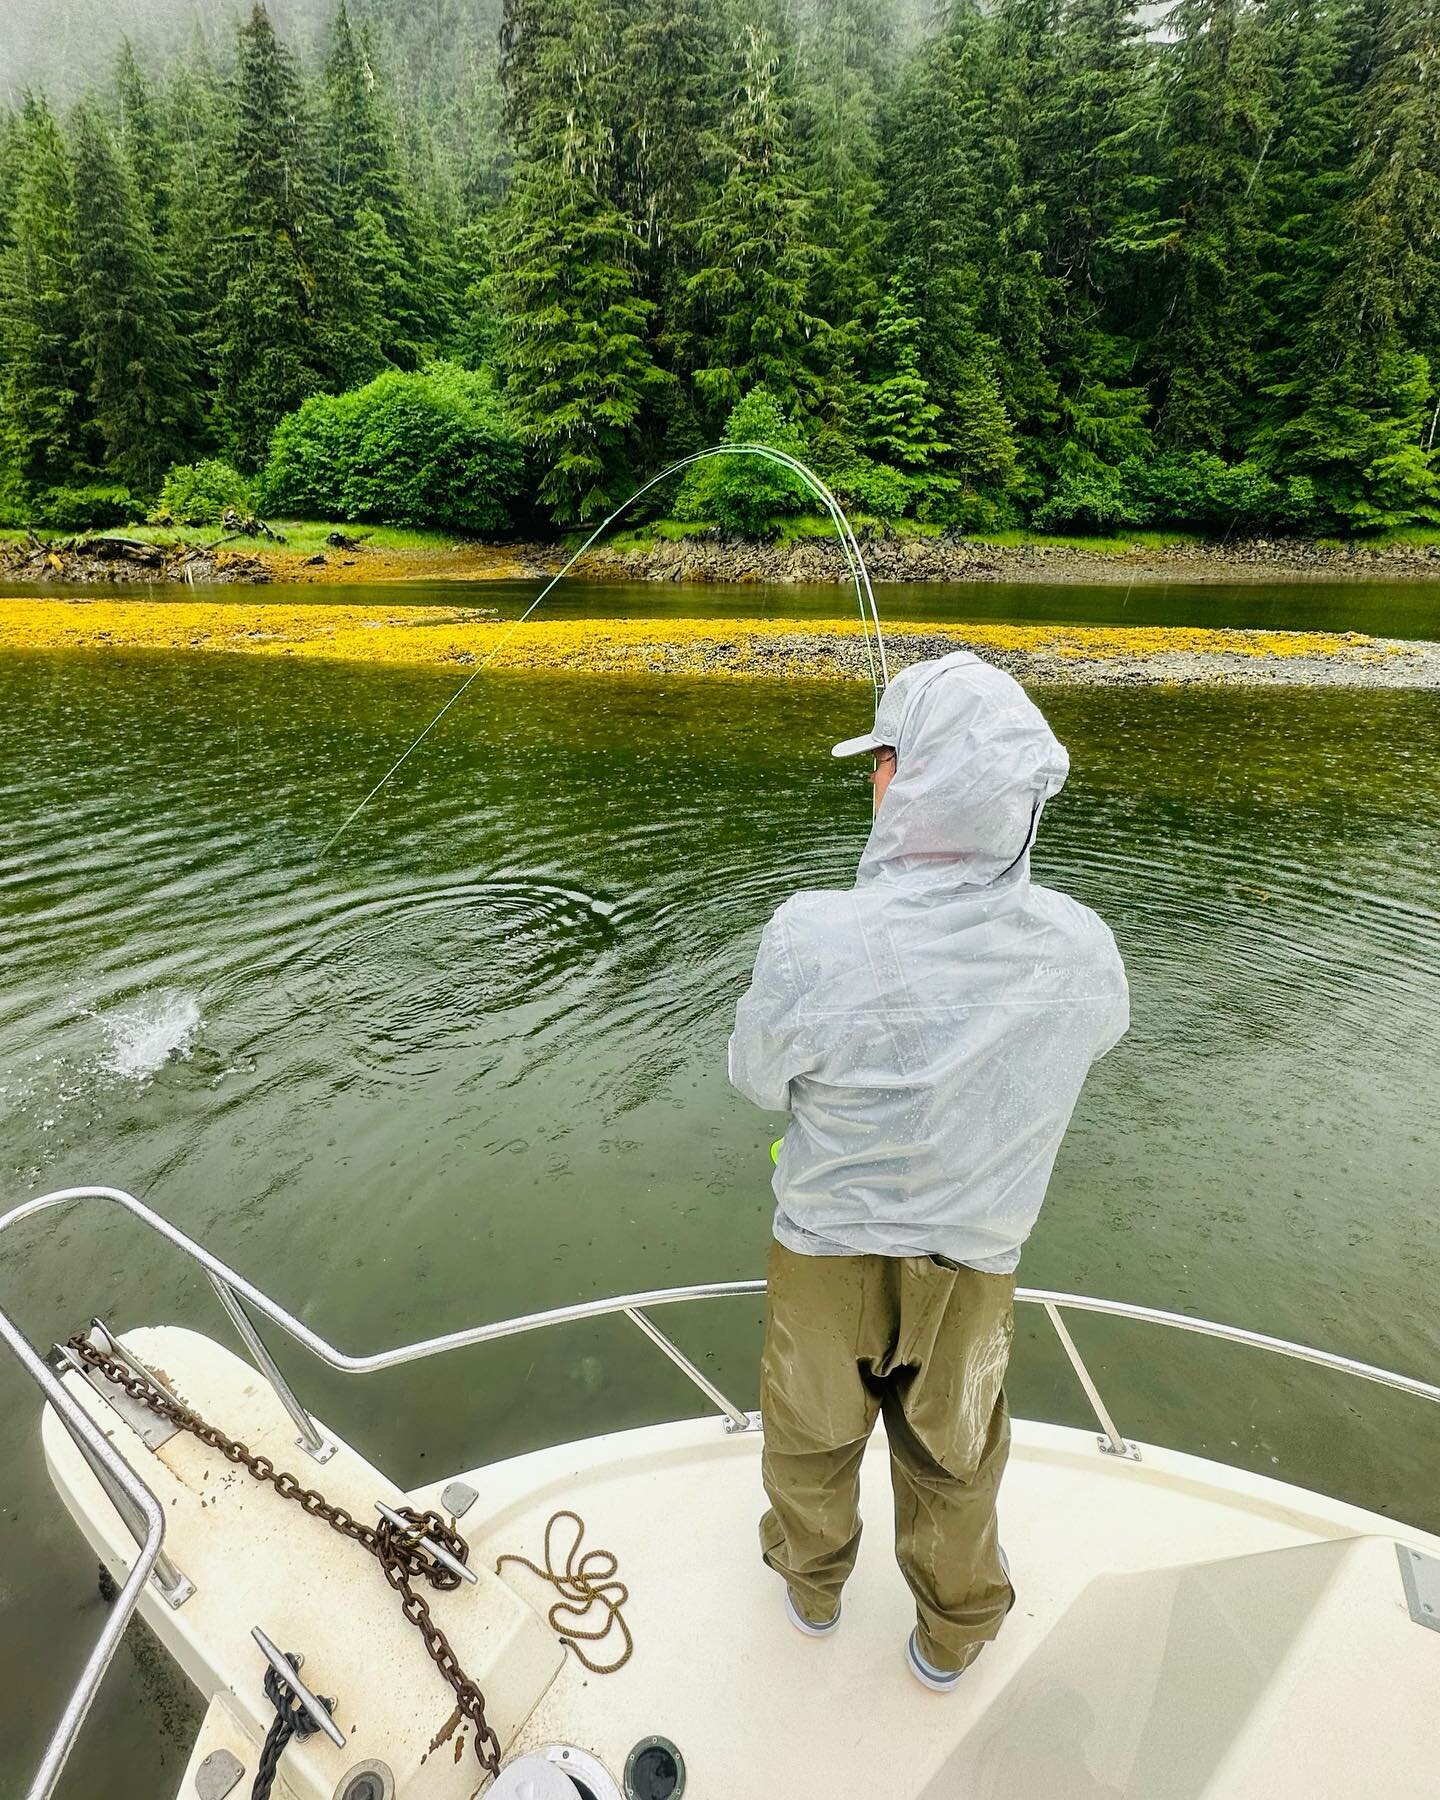 Today we got Chris on his first salmon using a fly rod. He was in town only for a few hours while on a @windstarcruises 
We persevered through the rain and had a blast! #sitka #alaska #tour #cruise #fishing #flyfish #alaskan #sitkaalaska #visitsitka 